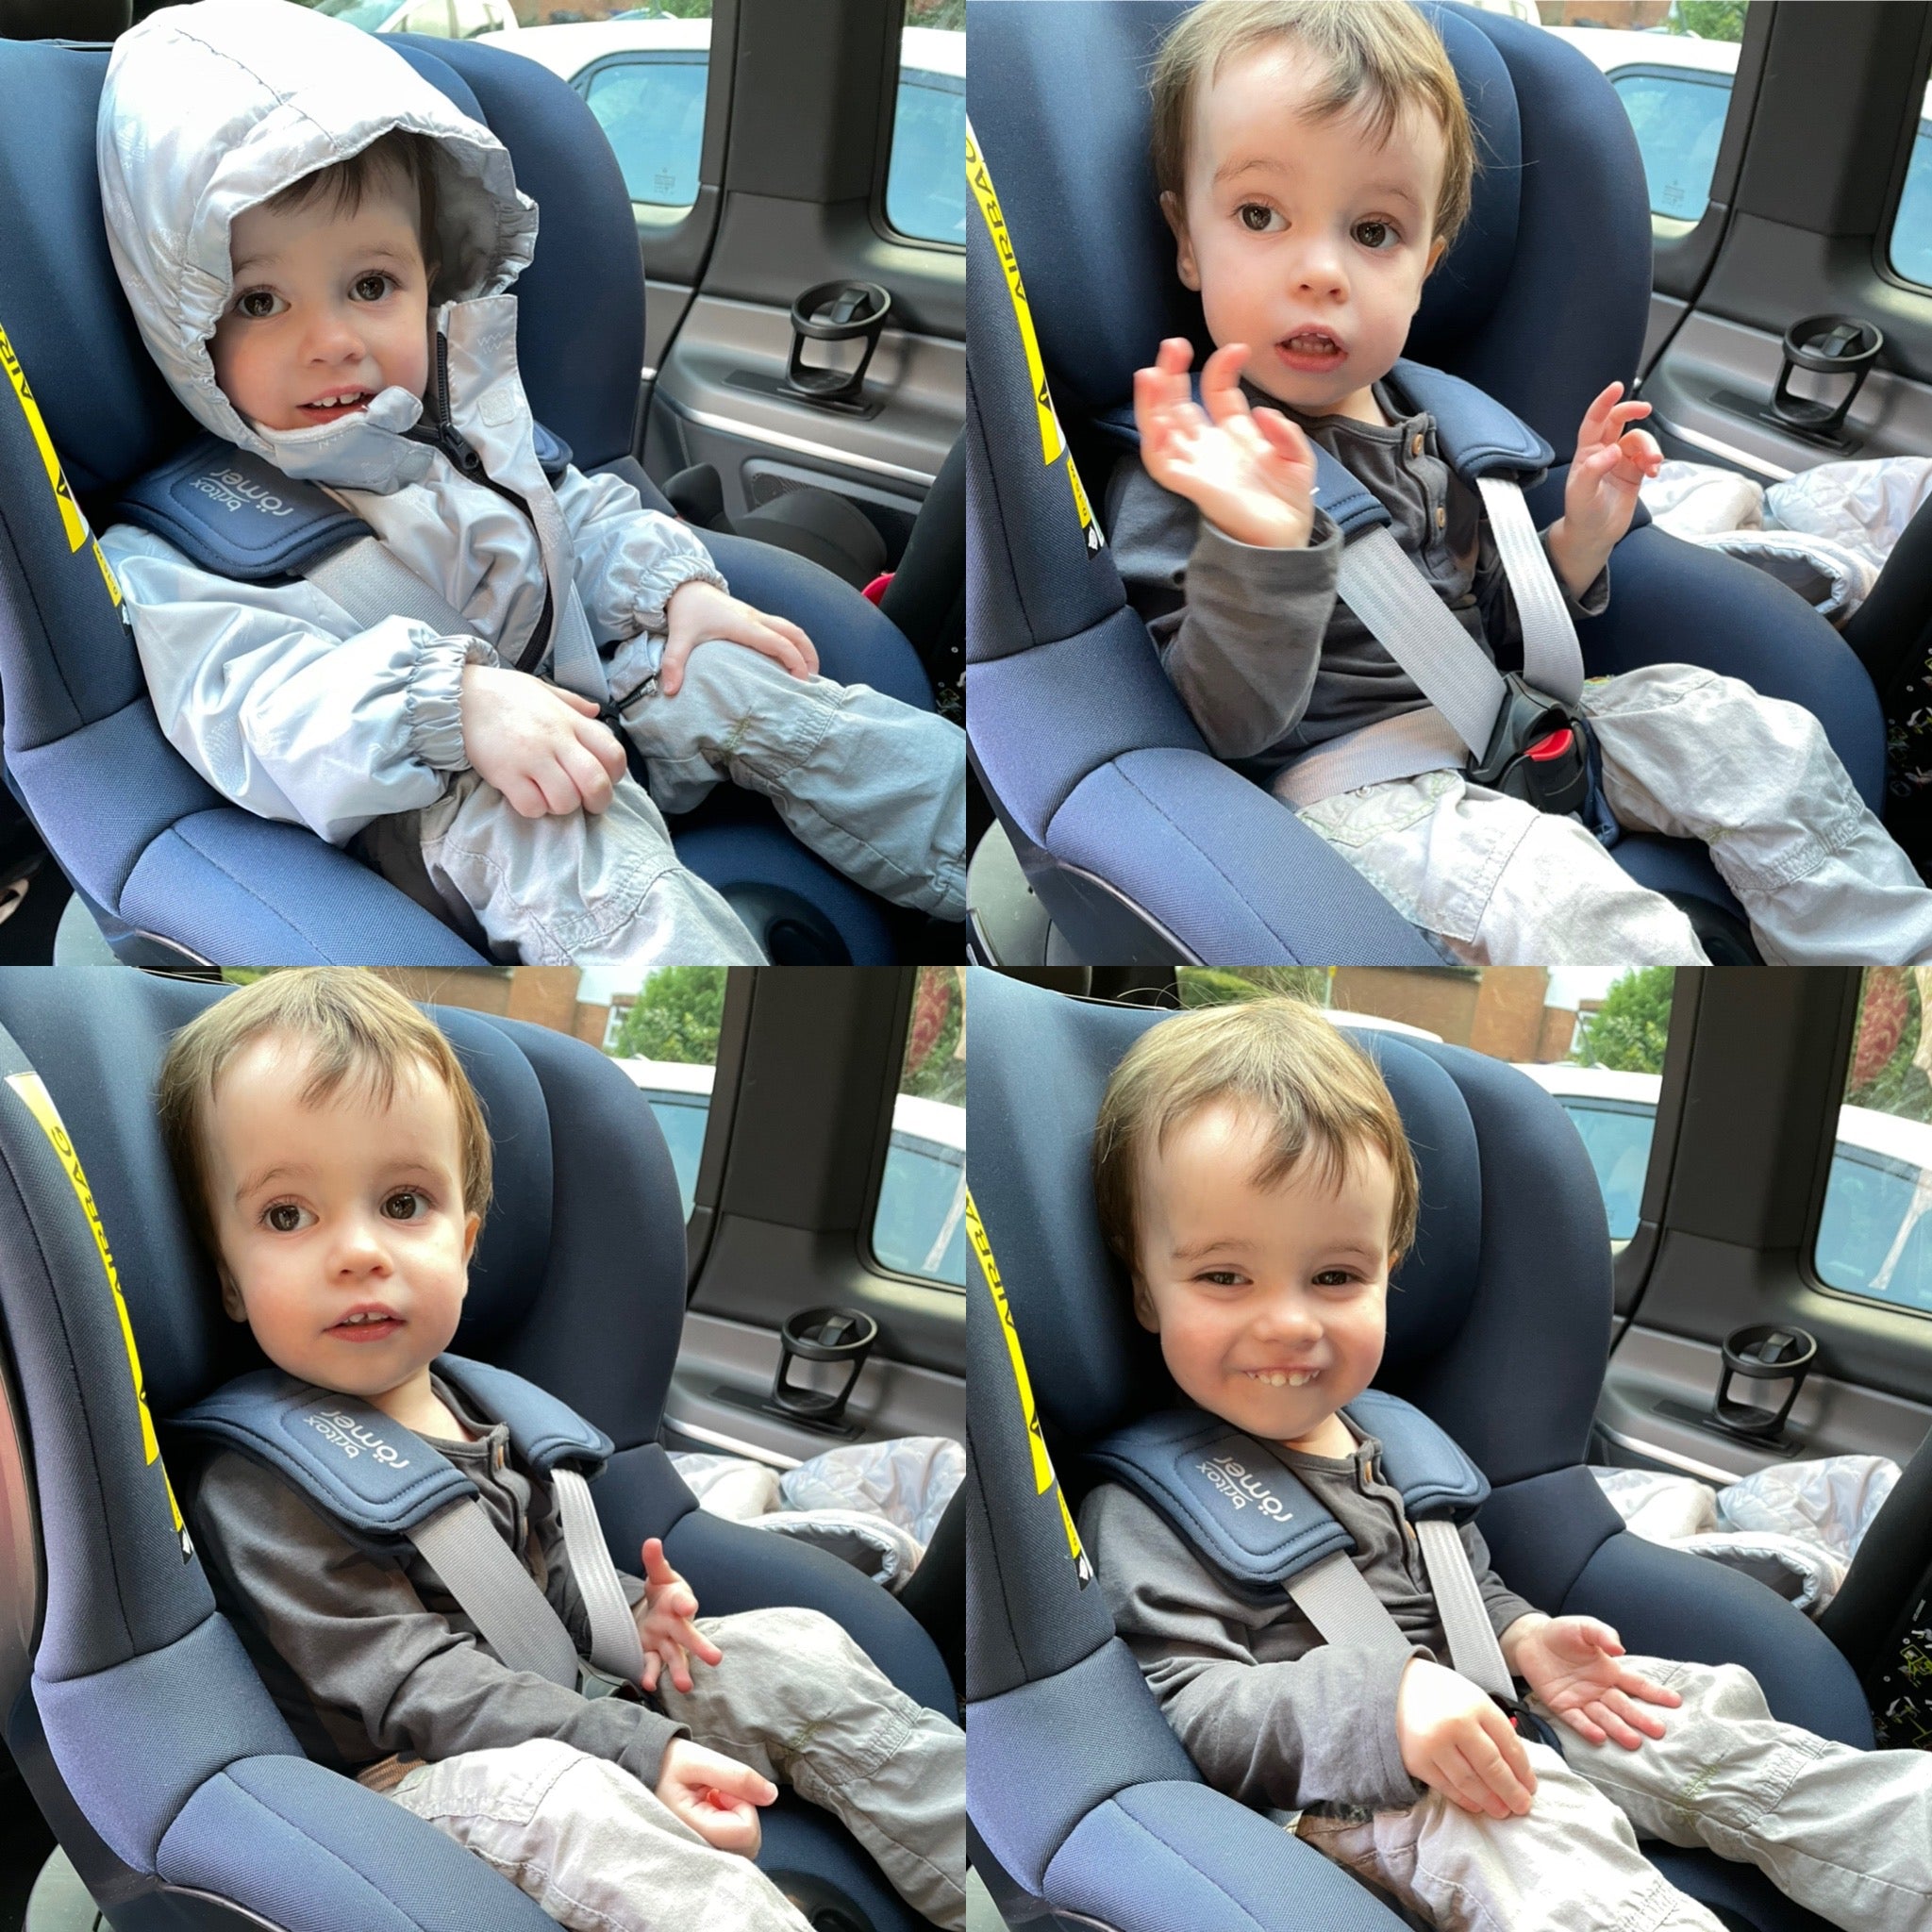 Car Seats for the Littles - Puffy winter coat in the car seat? No